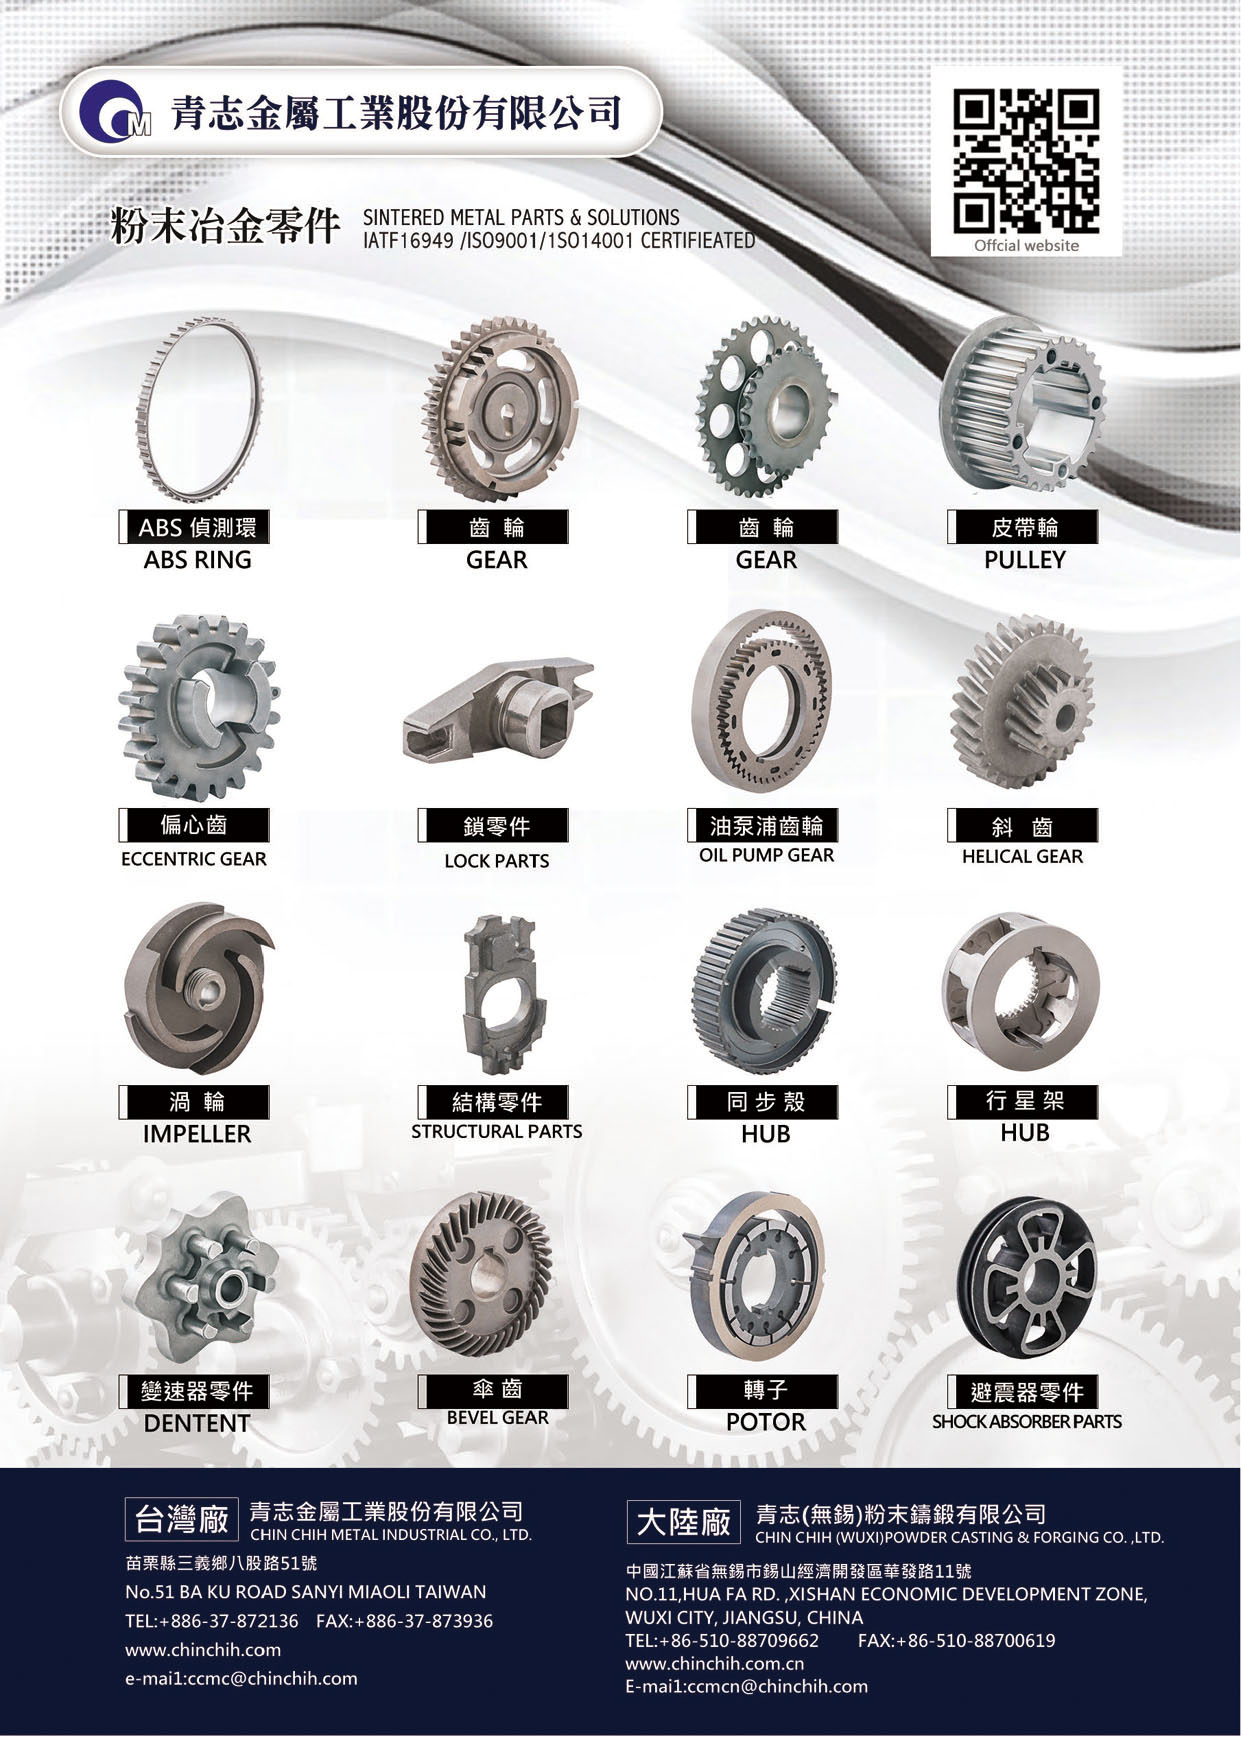 Who Makes Machinery in Taiwan (Chinese) CHIN CHIH METAL INDUSTRIAL CO., LTD.